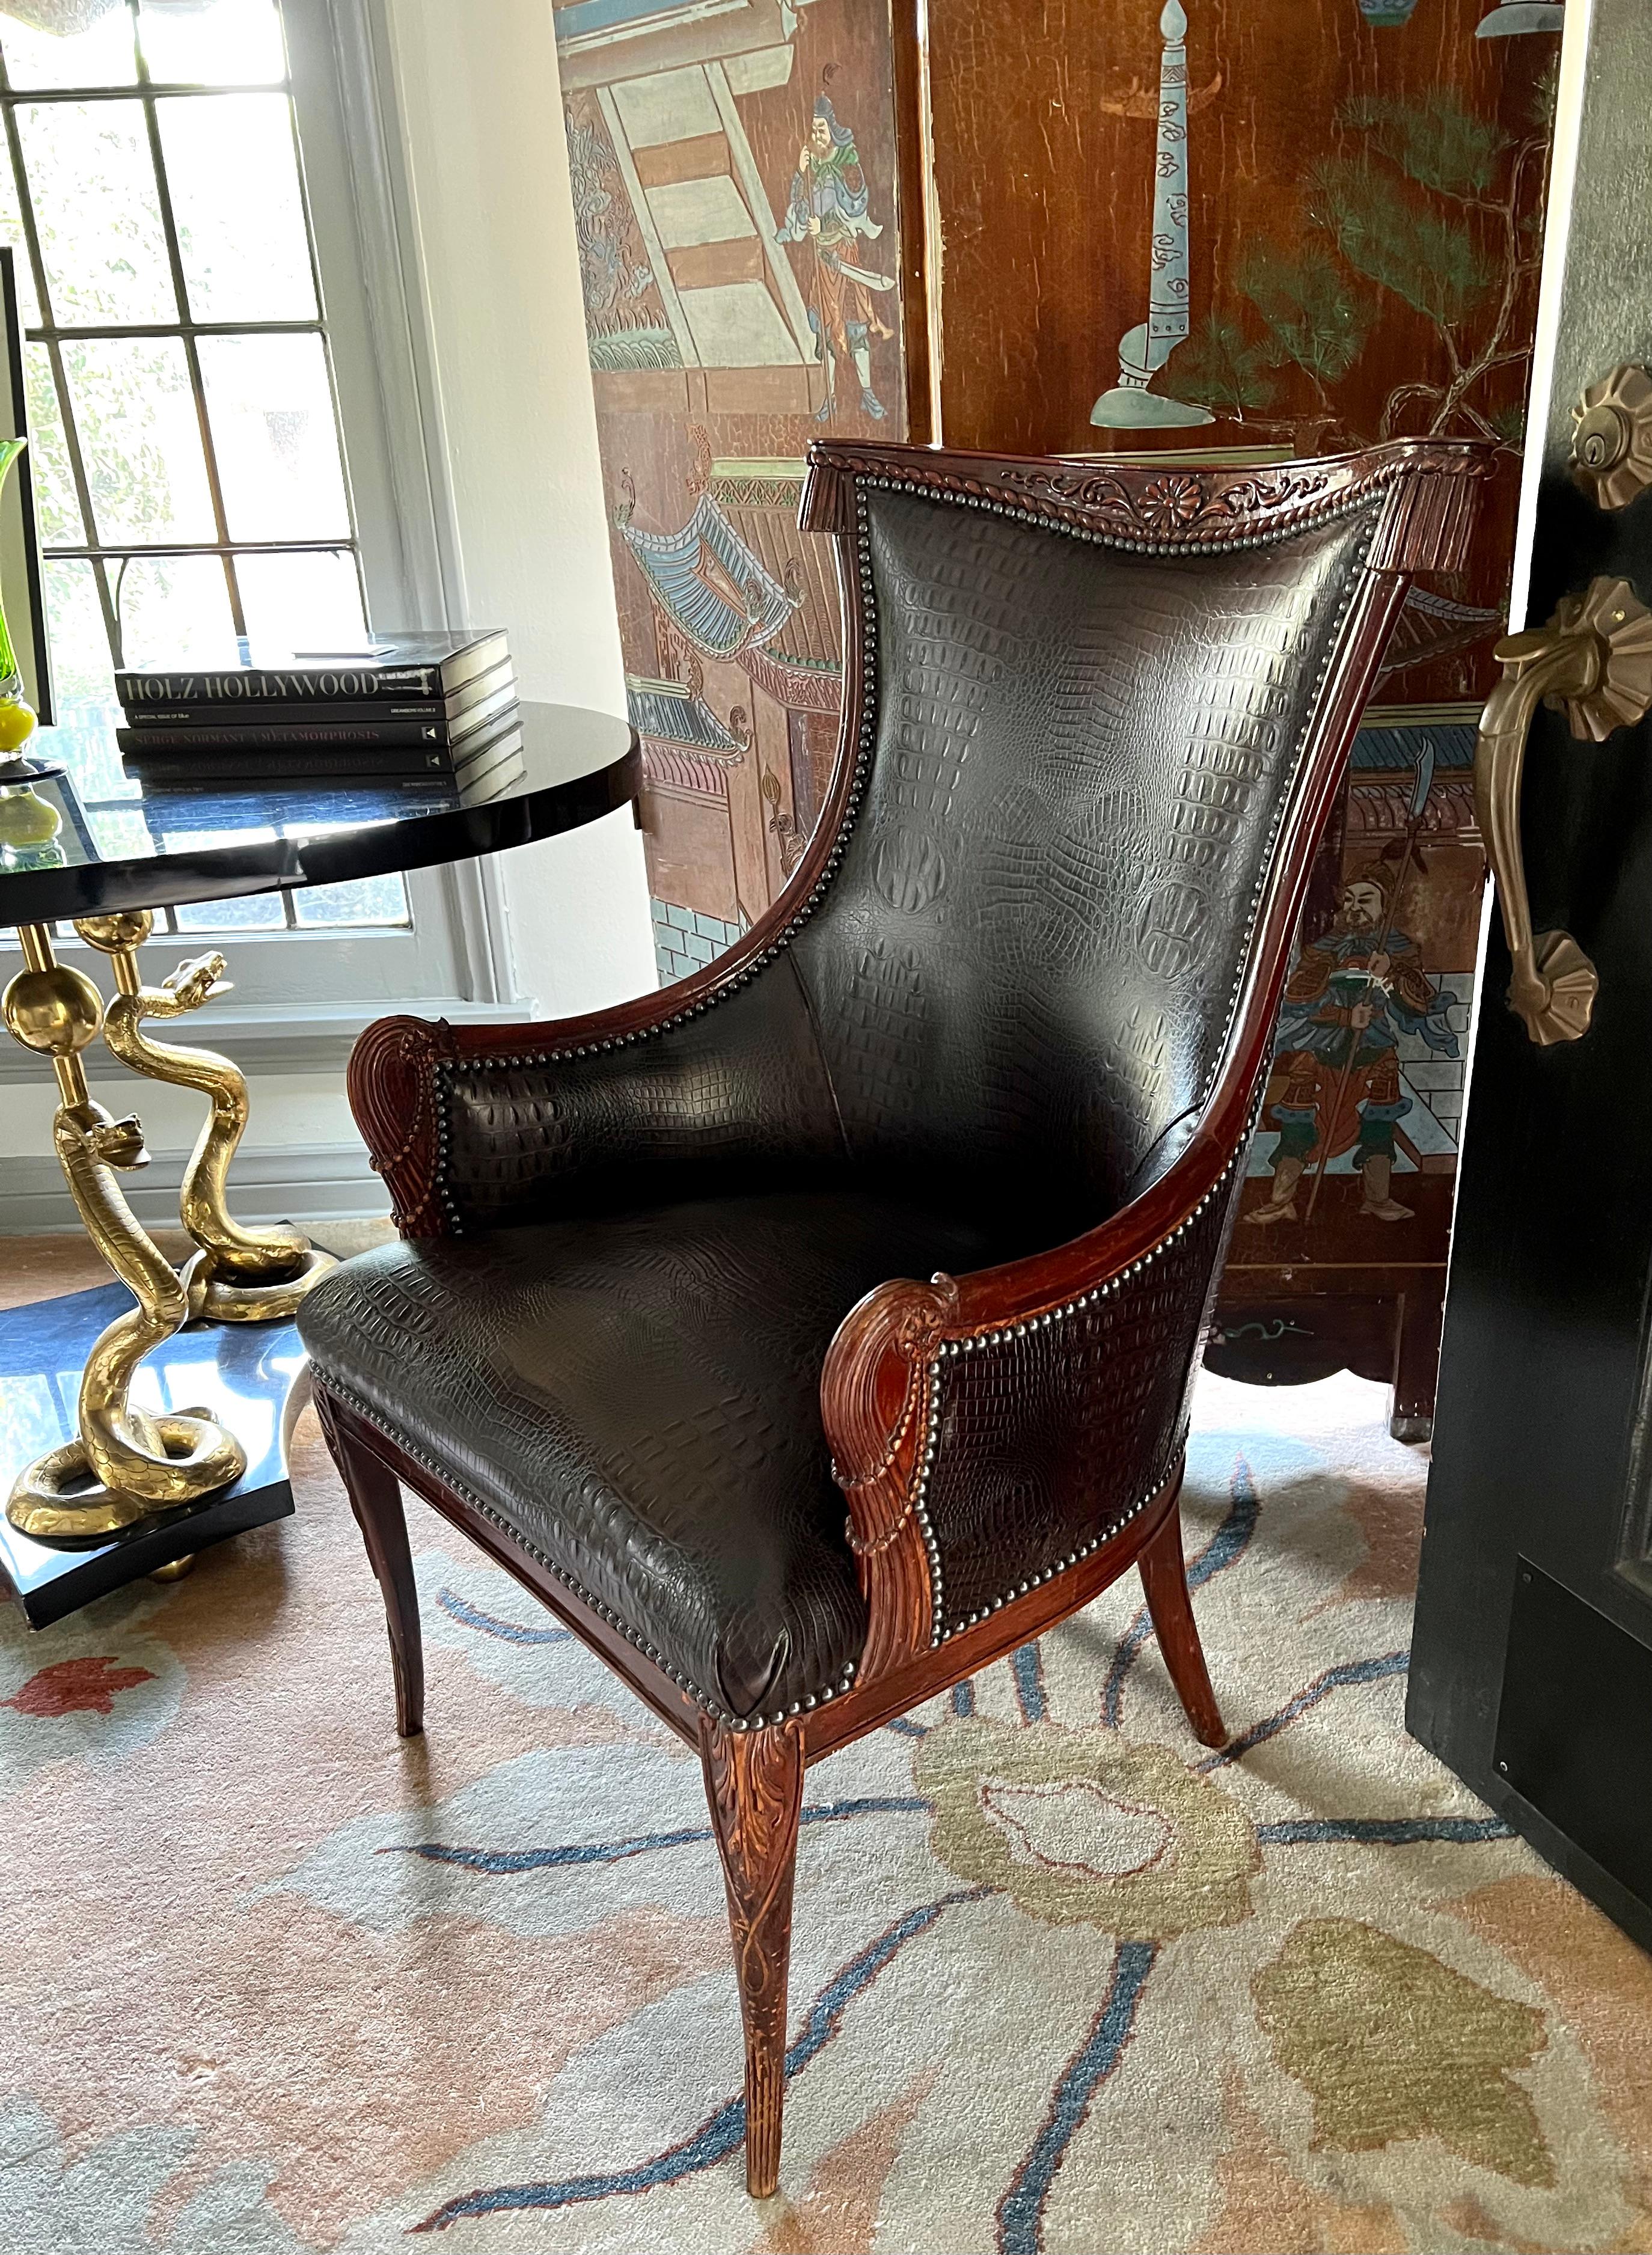 An original pair of Grosfeld House Hollywood Regency chairs, ca 1940's. The handsome pair have been re-upholstered in Crocodile pattern Leather. The frames are in excellent and stable condition.

The wood has been alone with many signs of